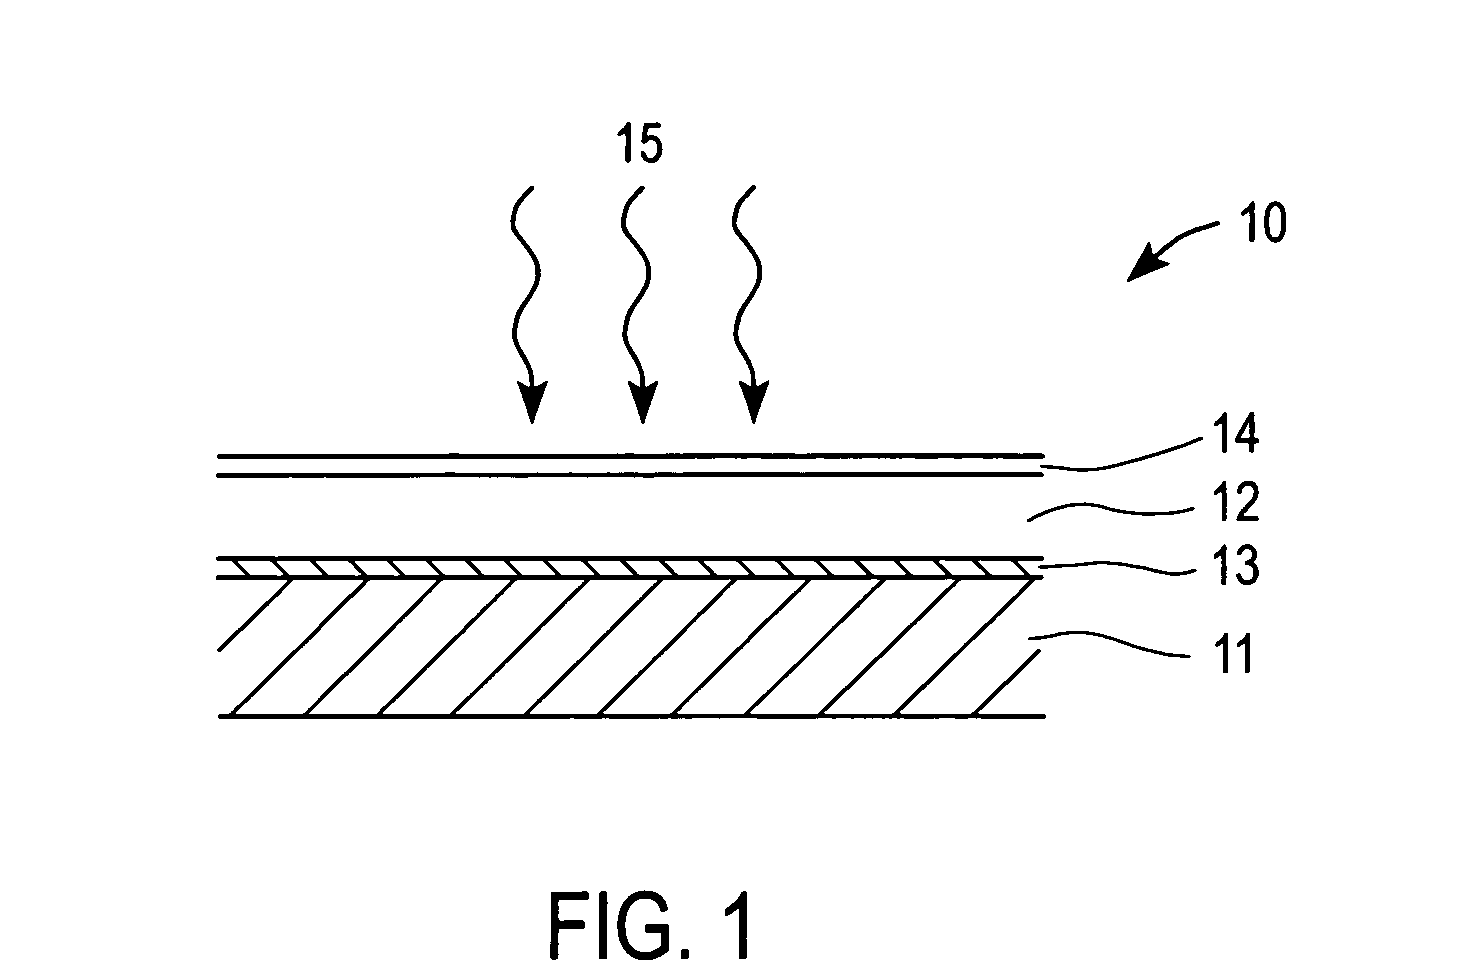 Technique and apparatus for depositing layers of semiconductors for solar cell and module fabrication